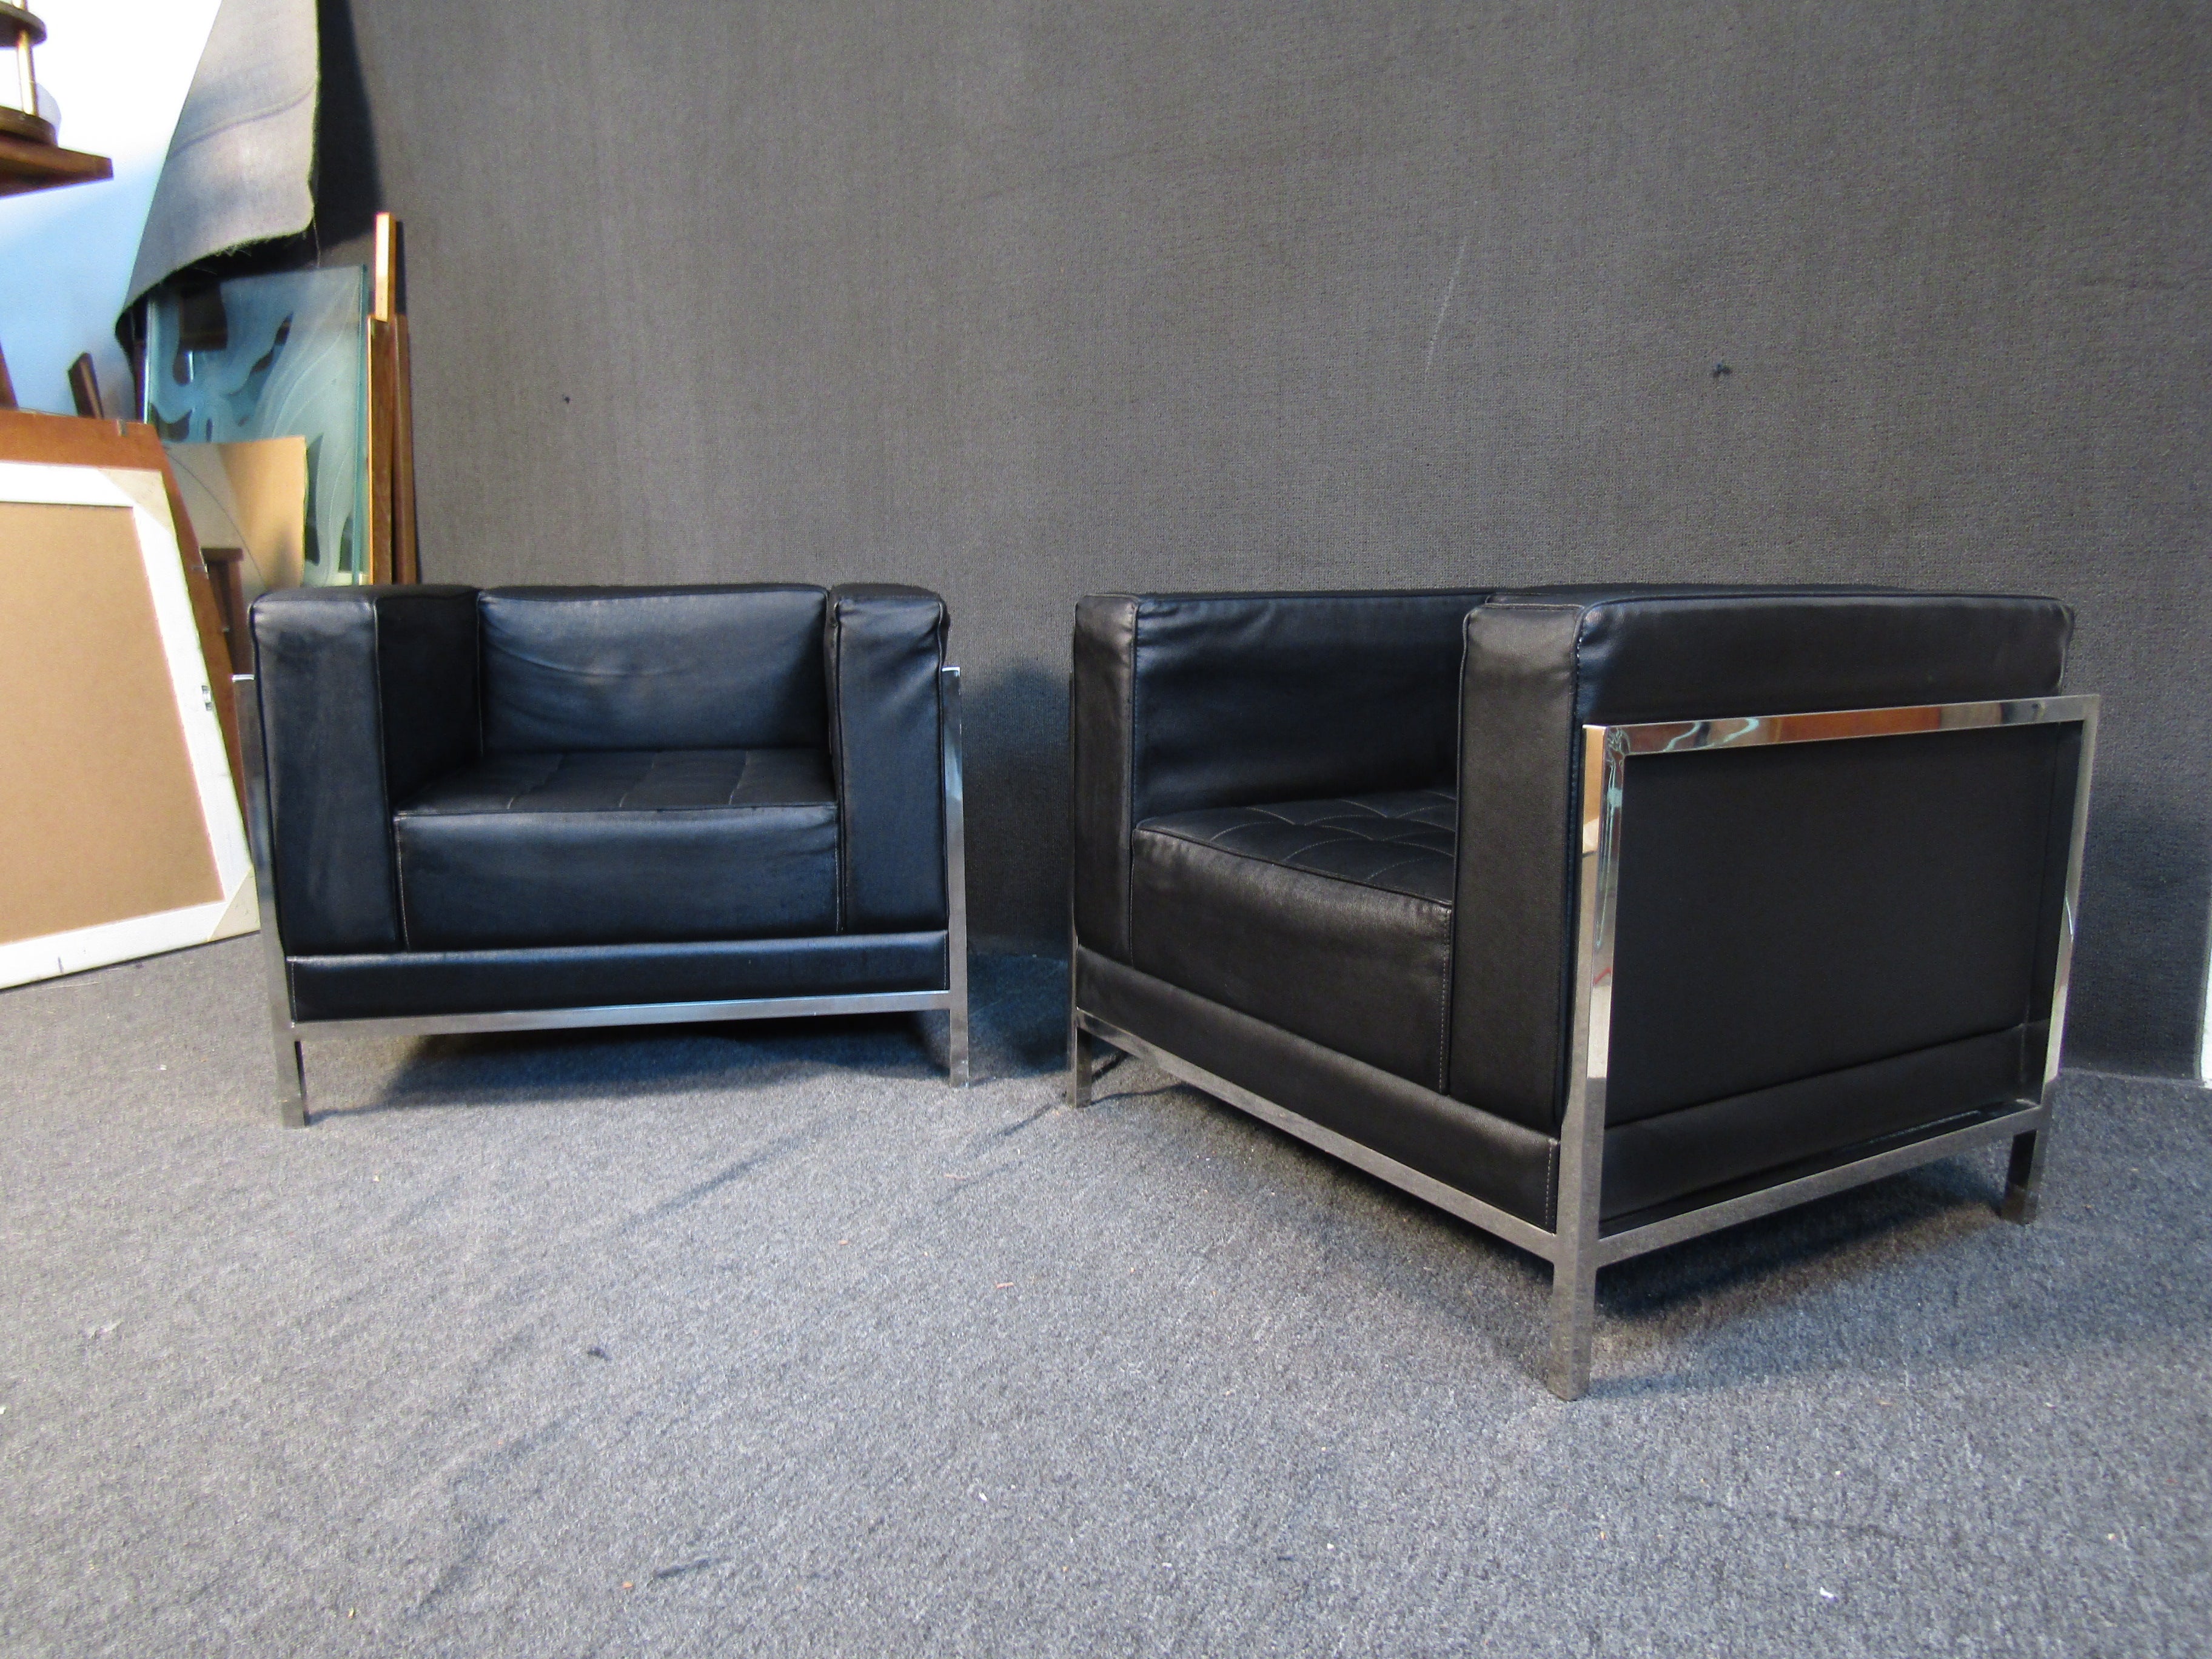 This pair of elegant club chairs combines dark rich leather with a bright chrome frame. An oversized cushioned design provides comfortable seating in a Mid-Century Modern design. Please confirm item location with seller (NY/NJ).